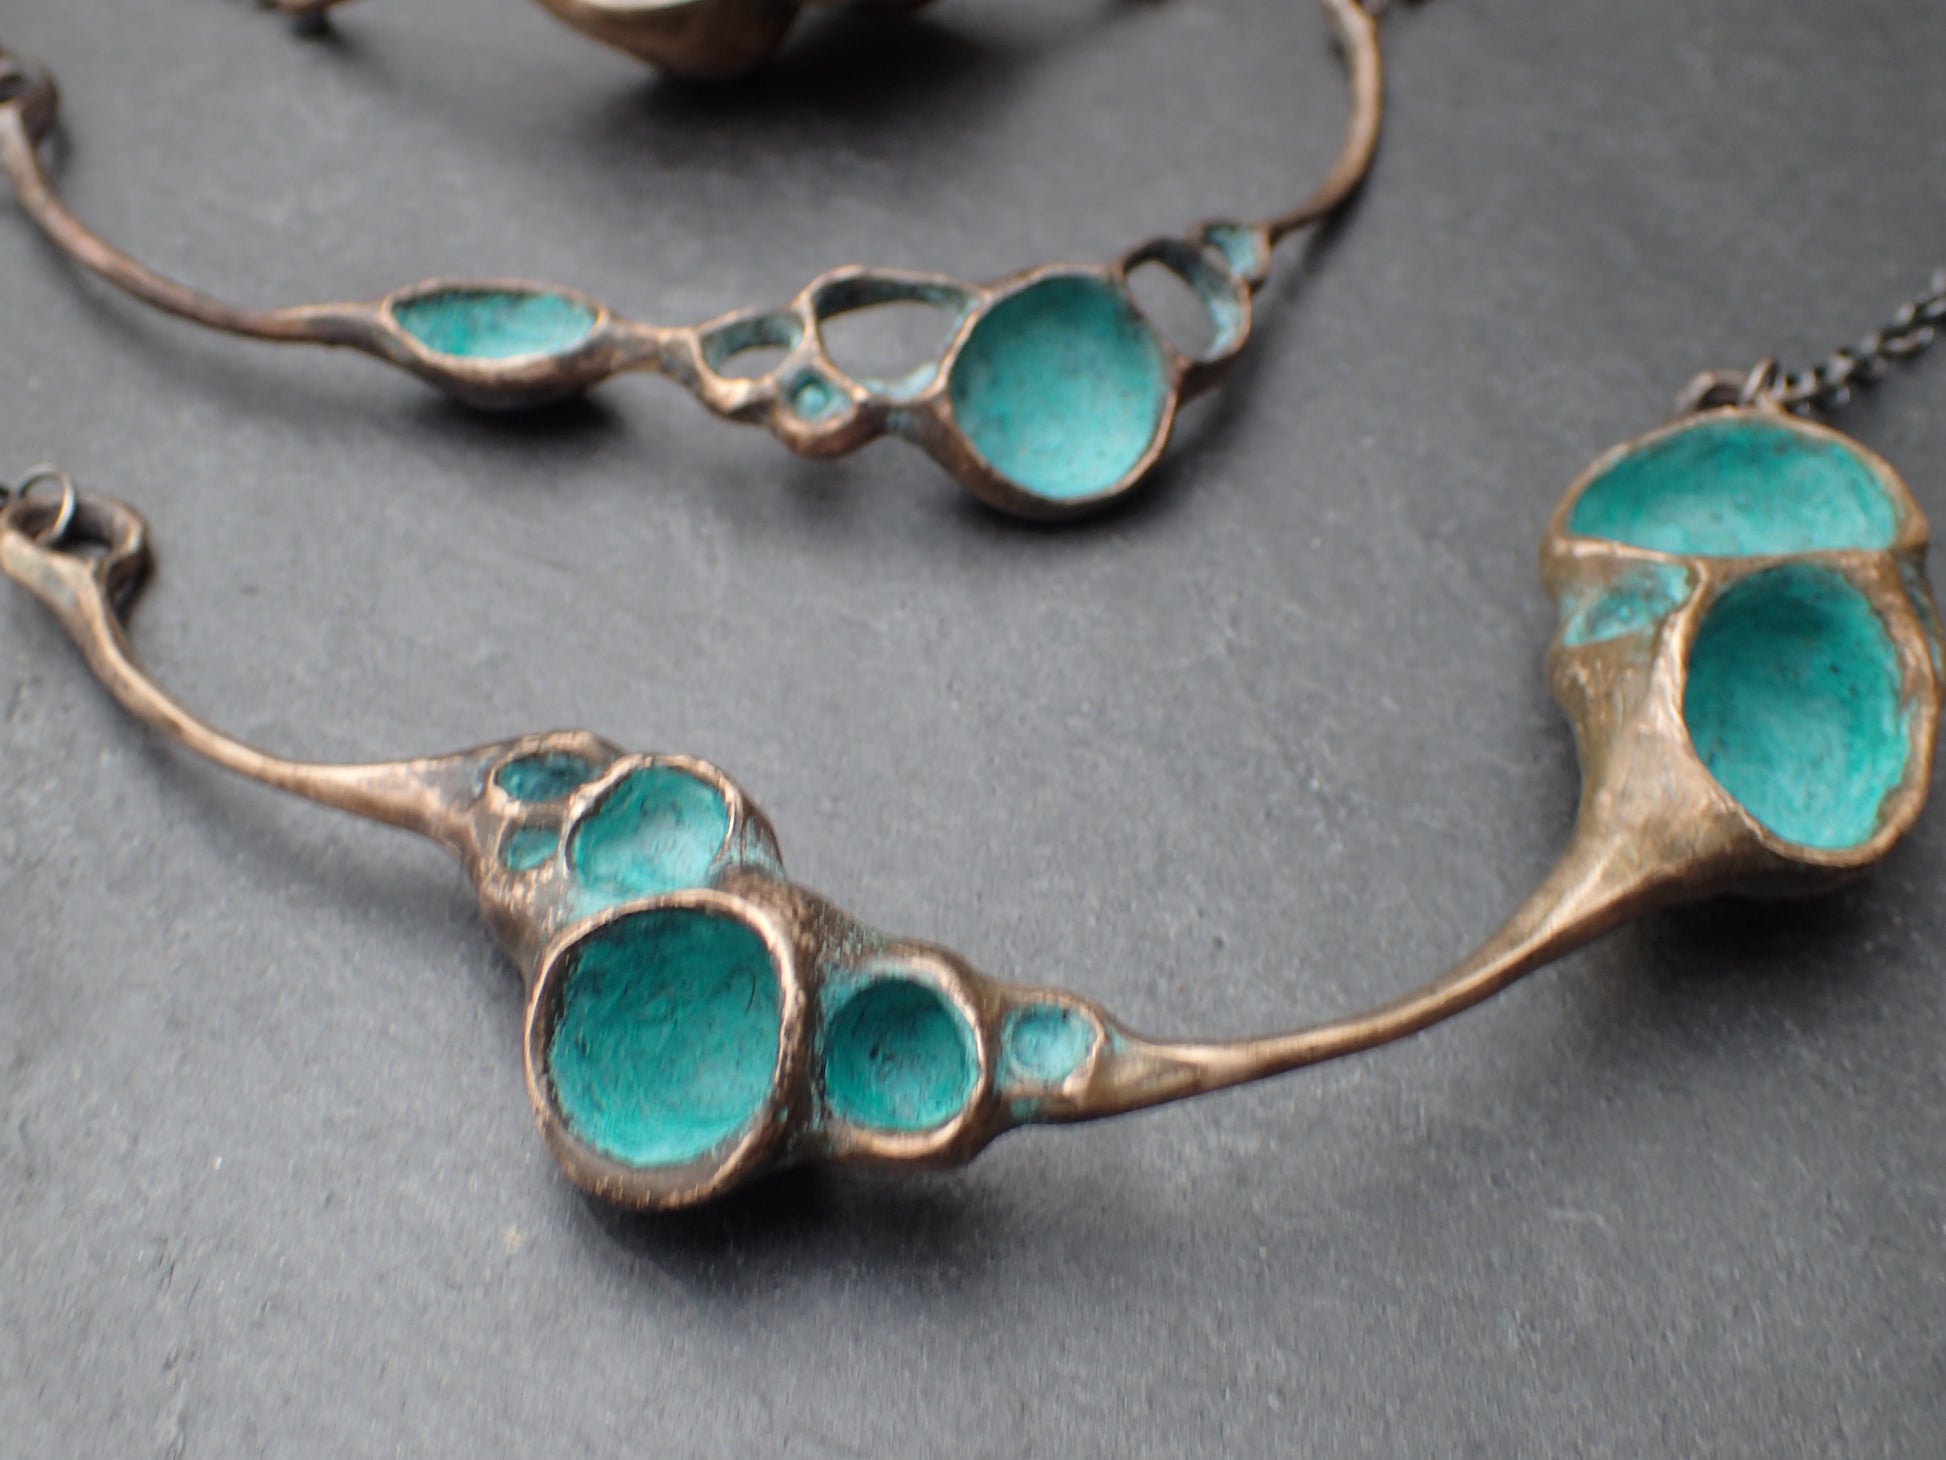 'Artefact' Necklace, Bronze with Turquiose patina, on 4mm silver chain.-Beca Beeby